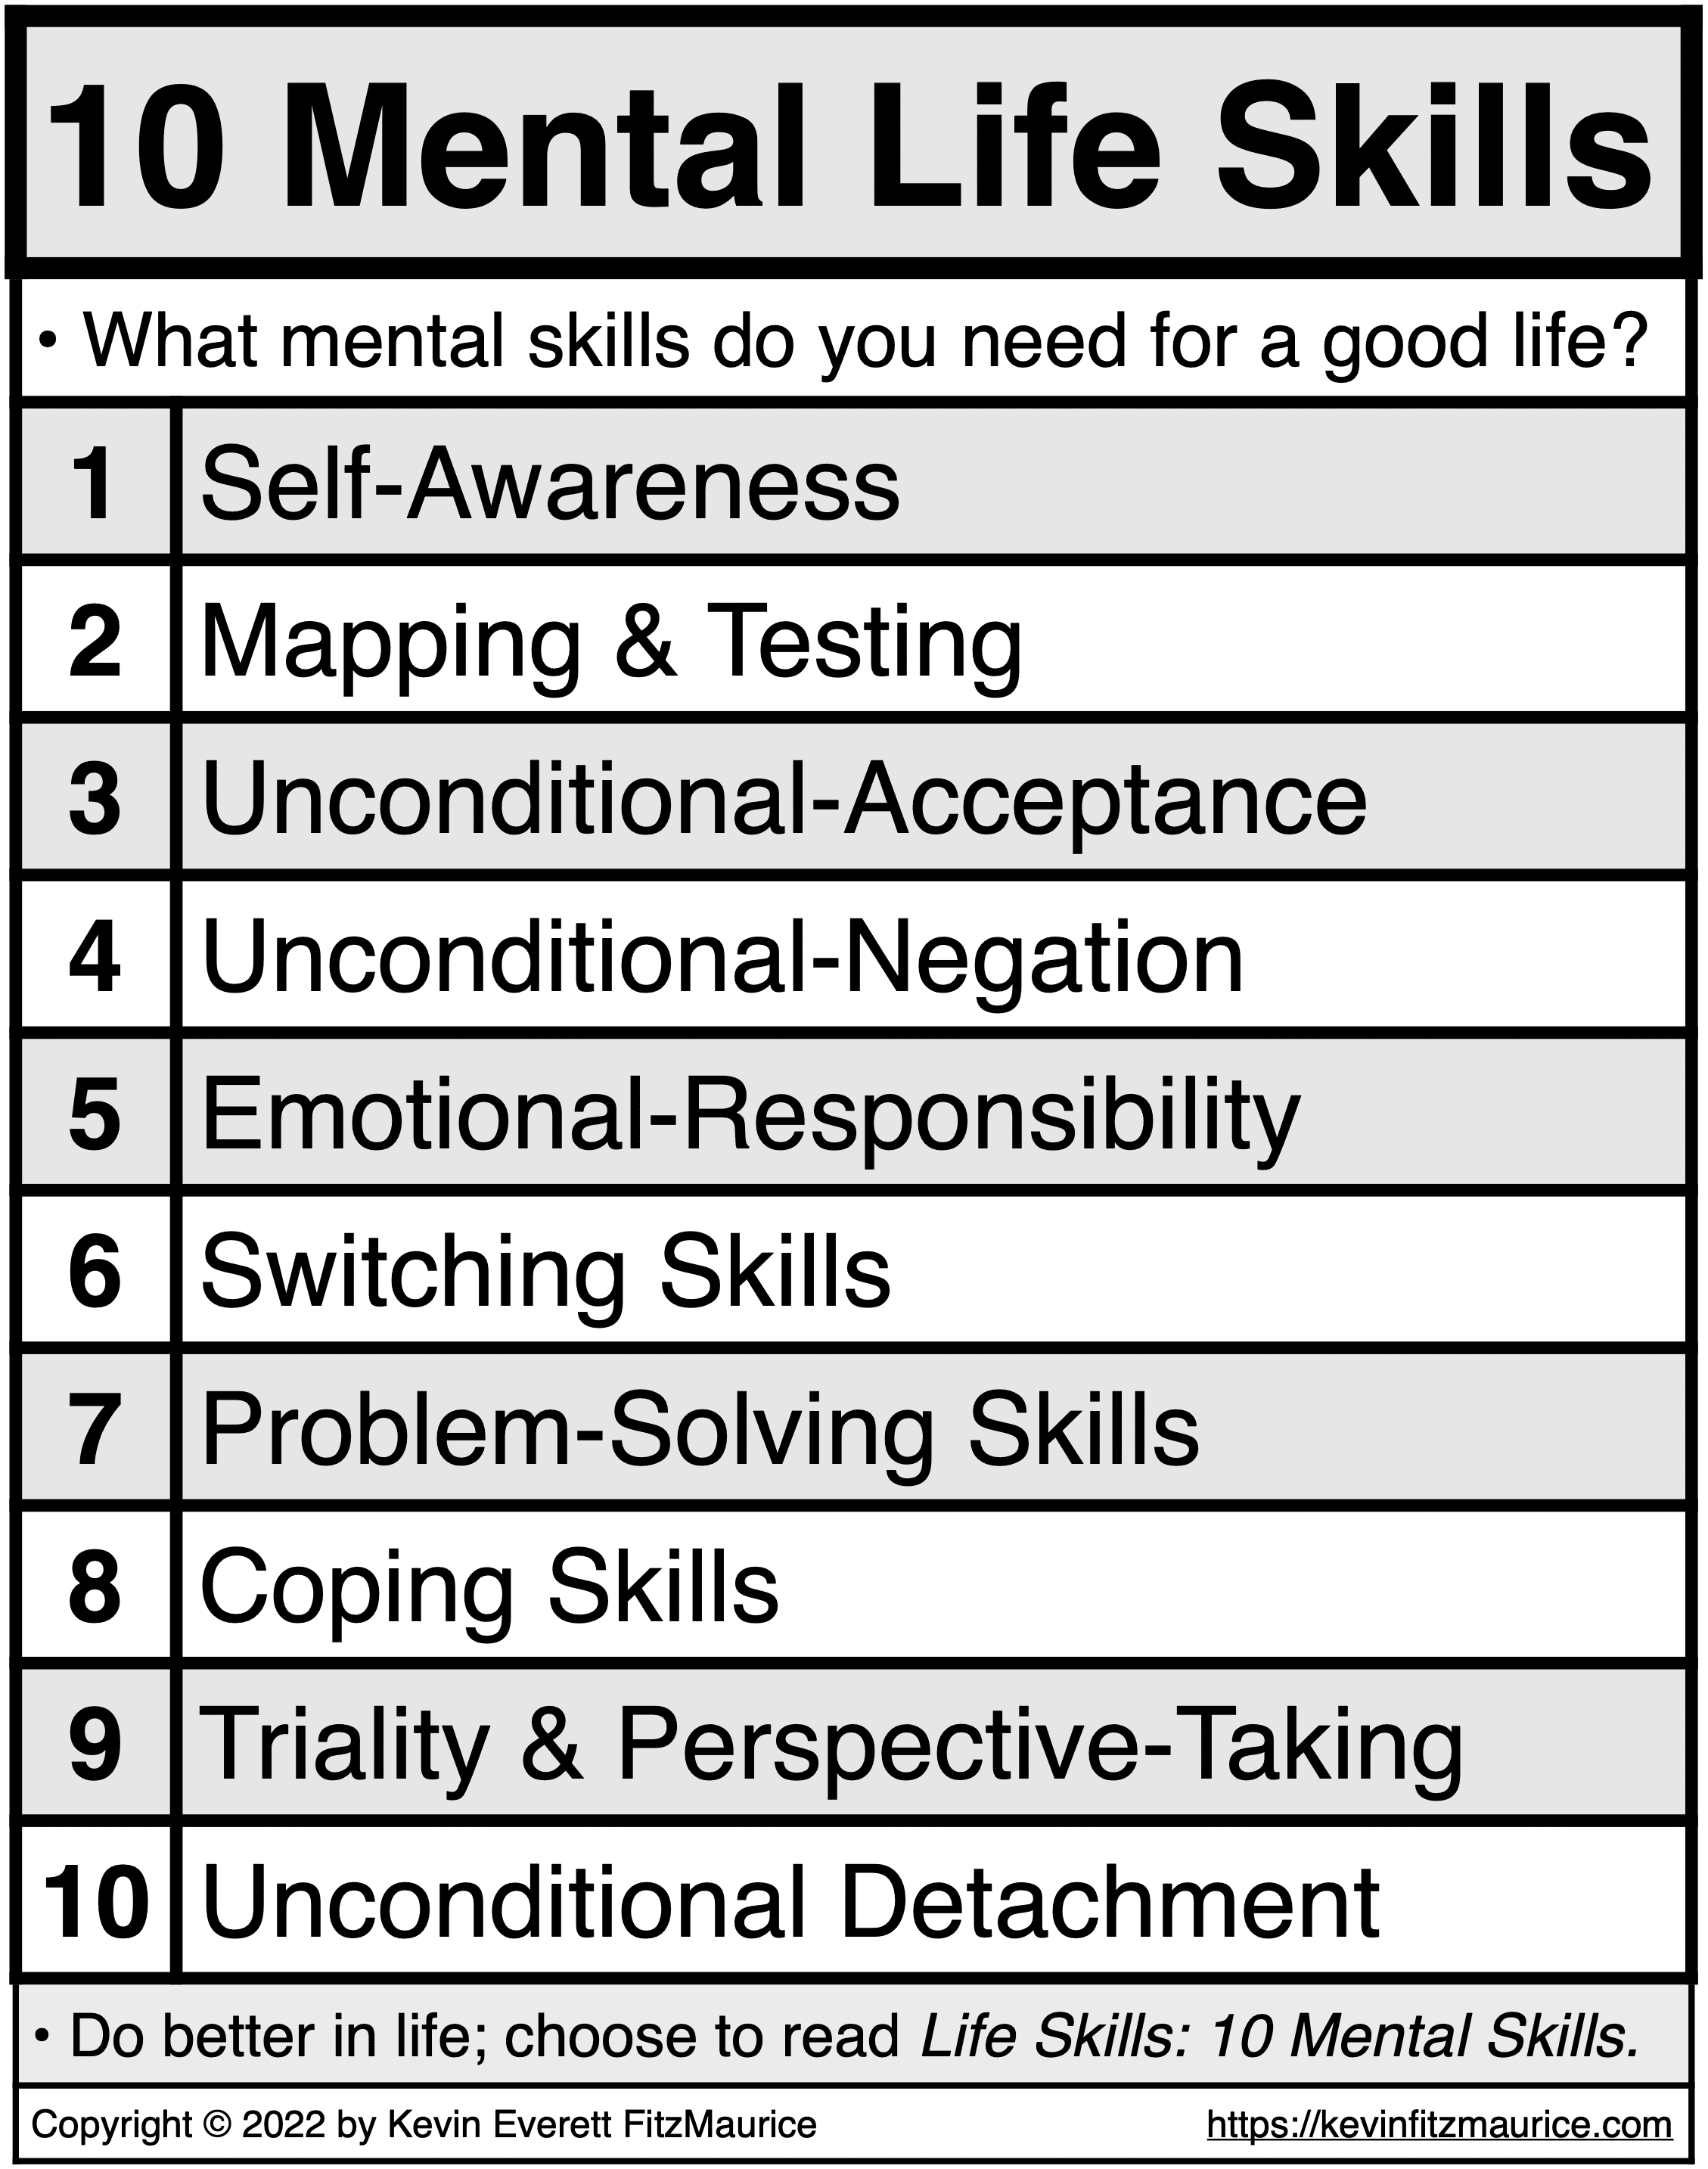 You Have 10 Basic Mental Skills that You Need